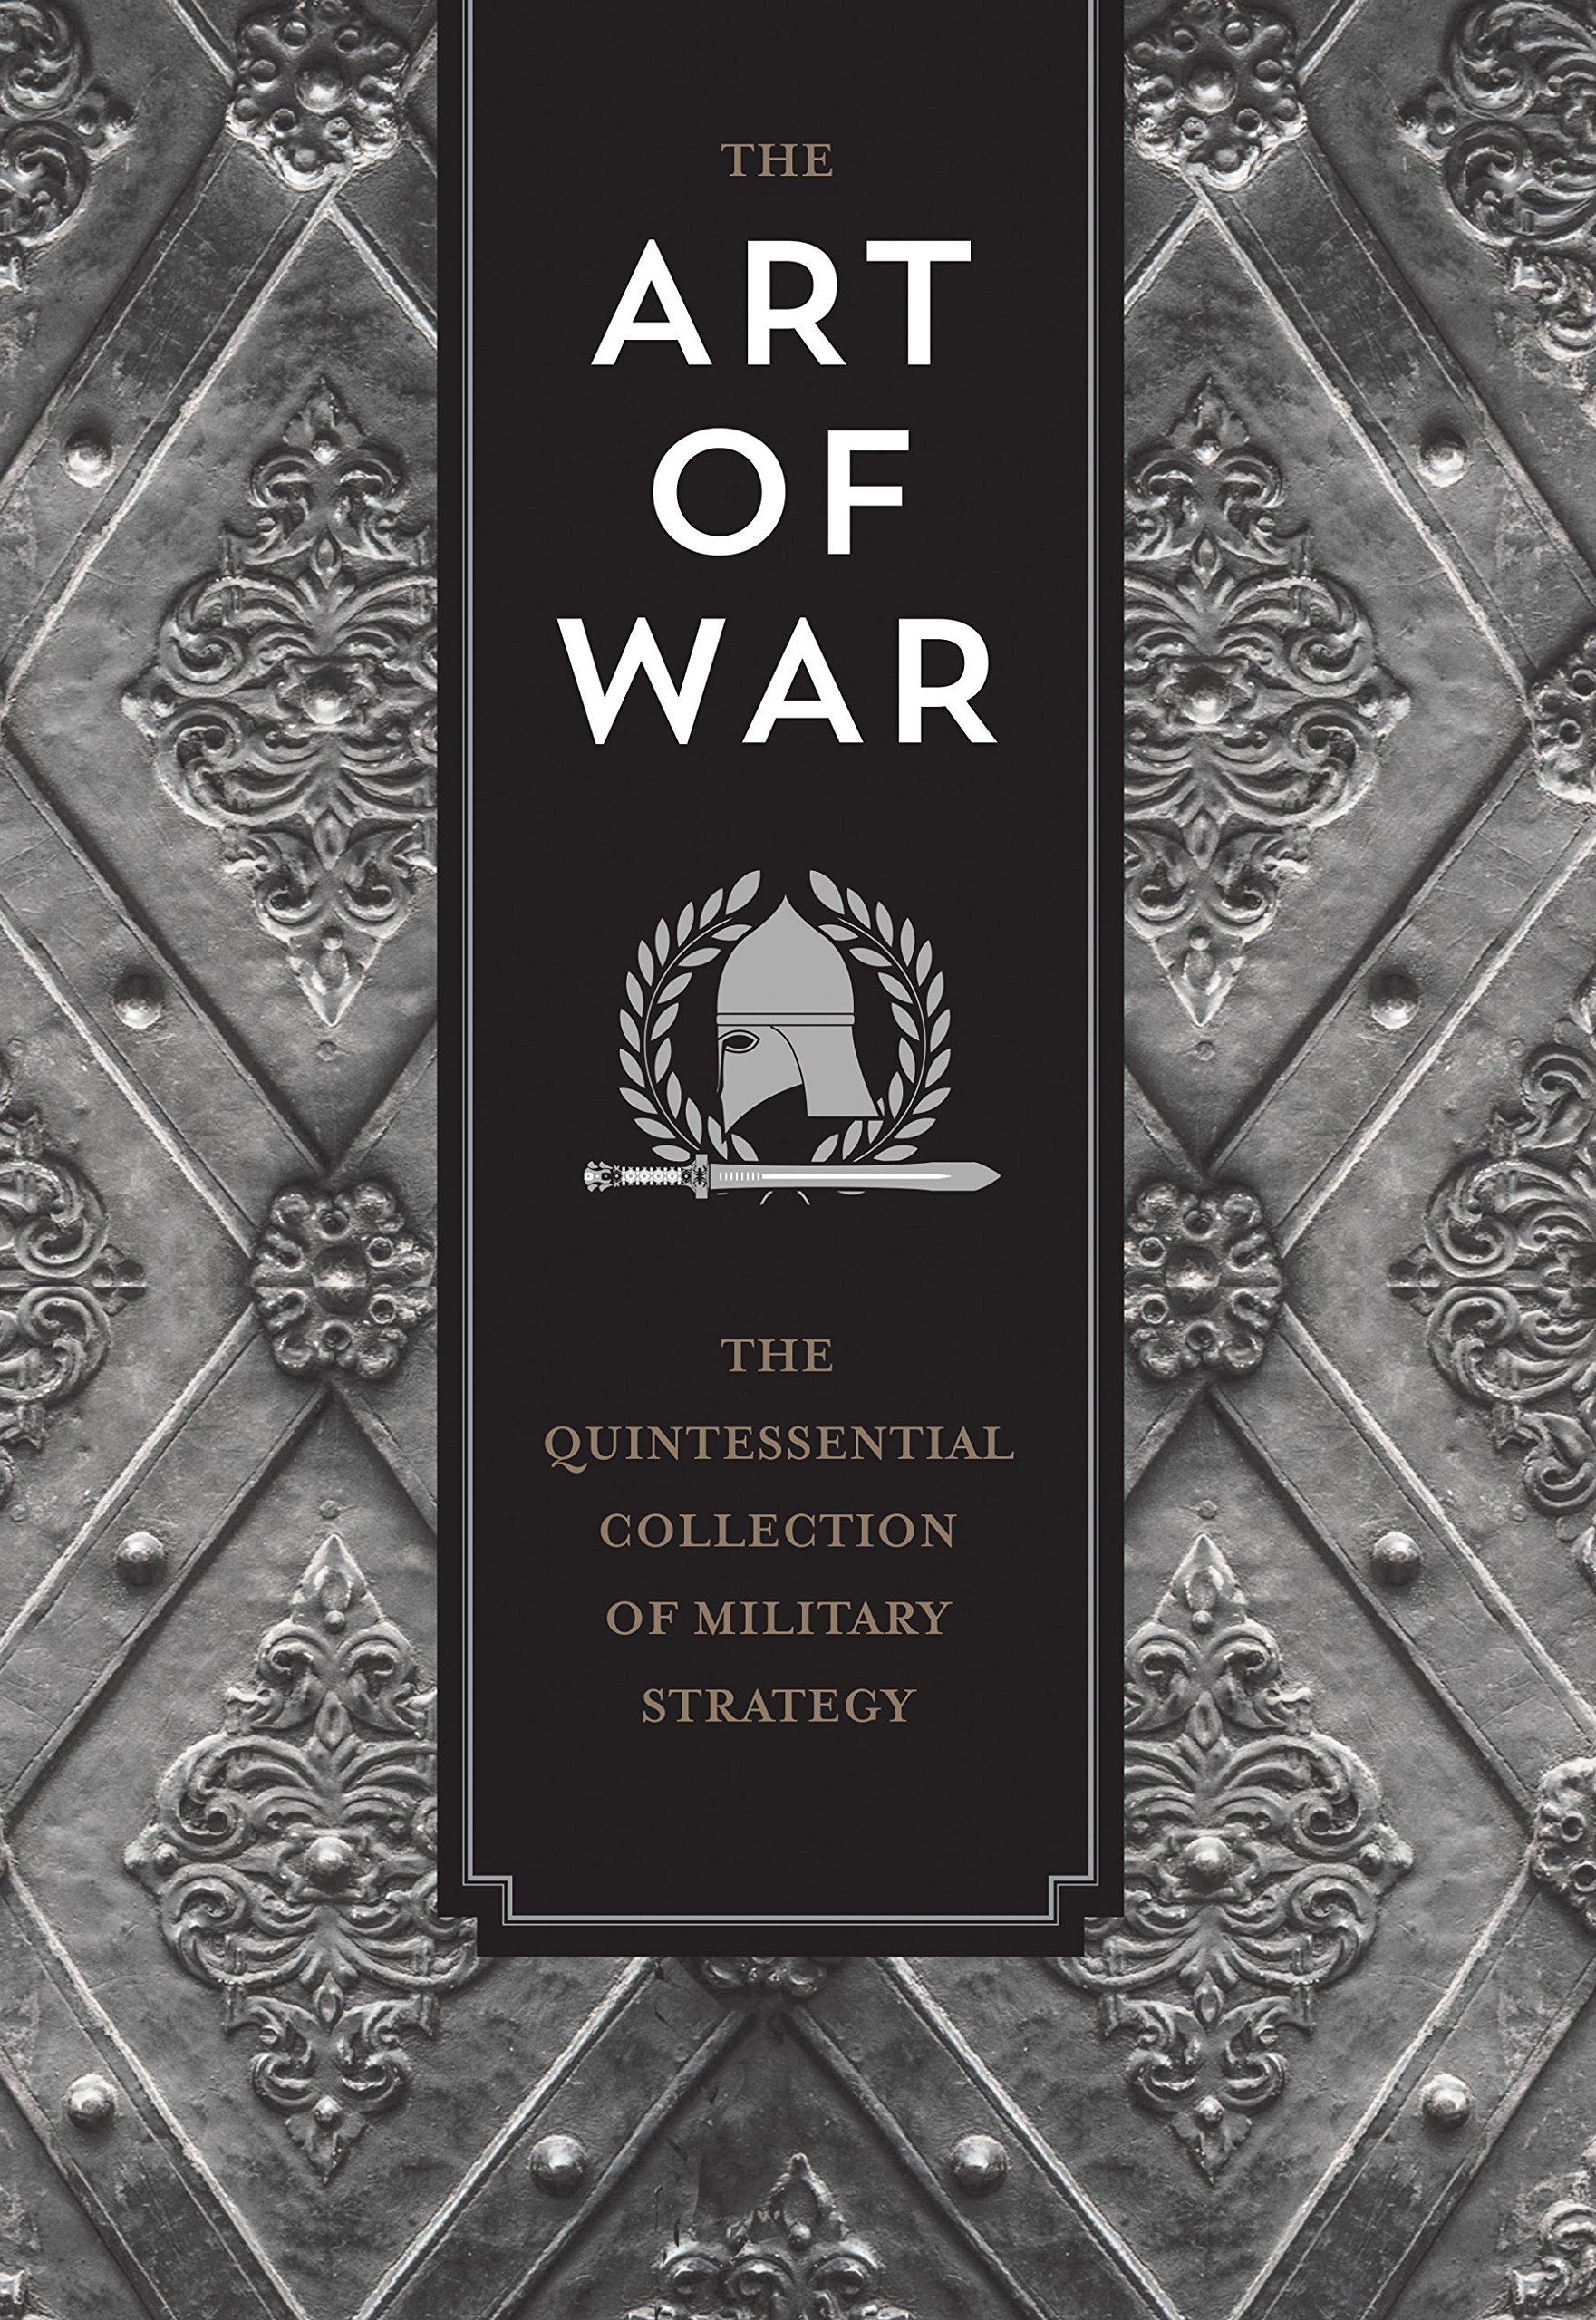 The Art of War - The Quintessential Collection of Military Strategy | Sun Tzu, Niccolo Machiavelli